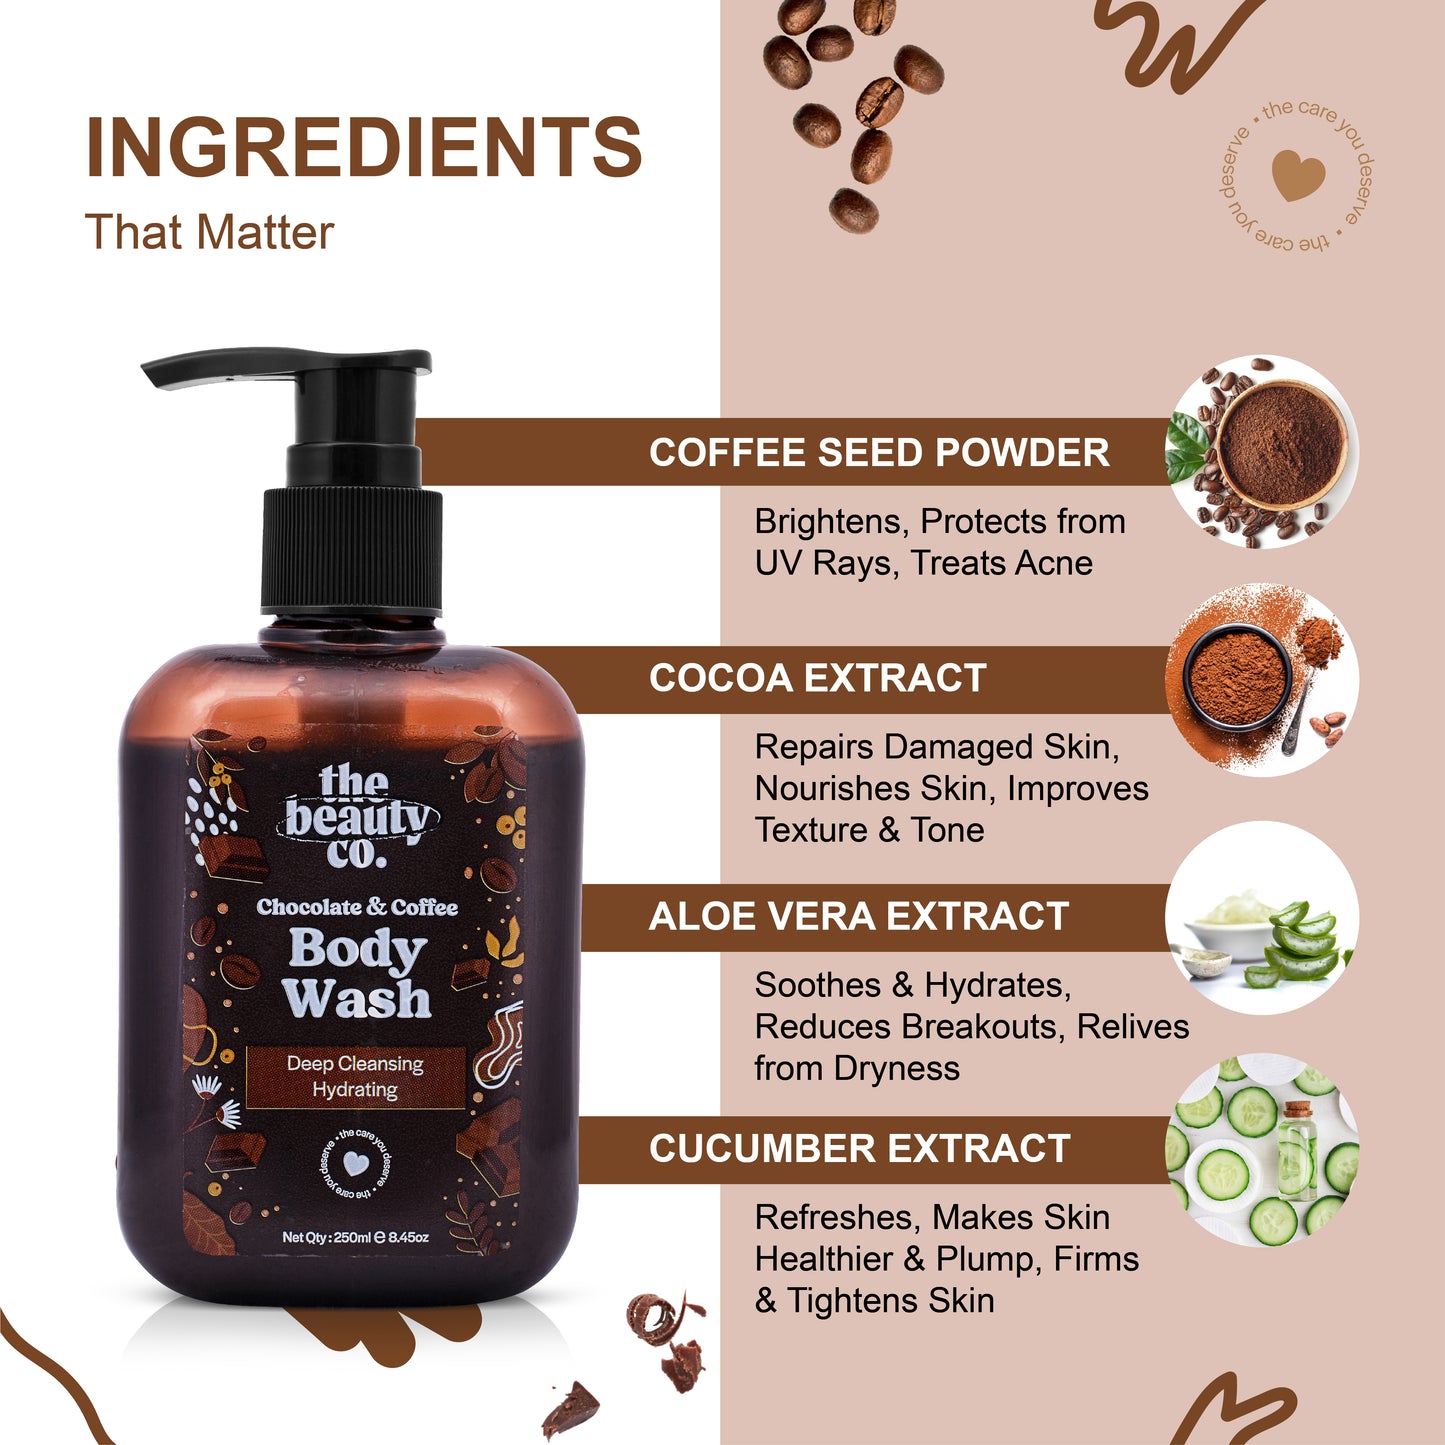 Chocolate & Coffee Body Wash for Deep Cleansing | 250 ml